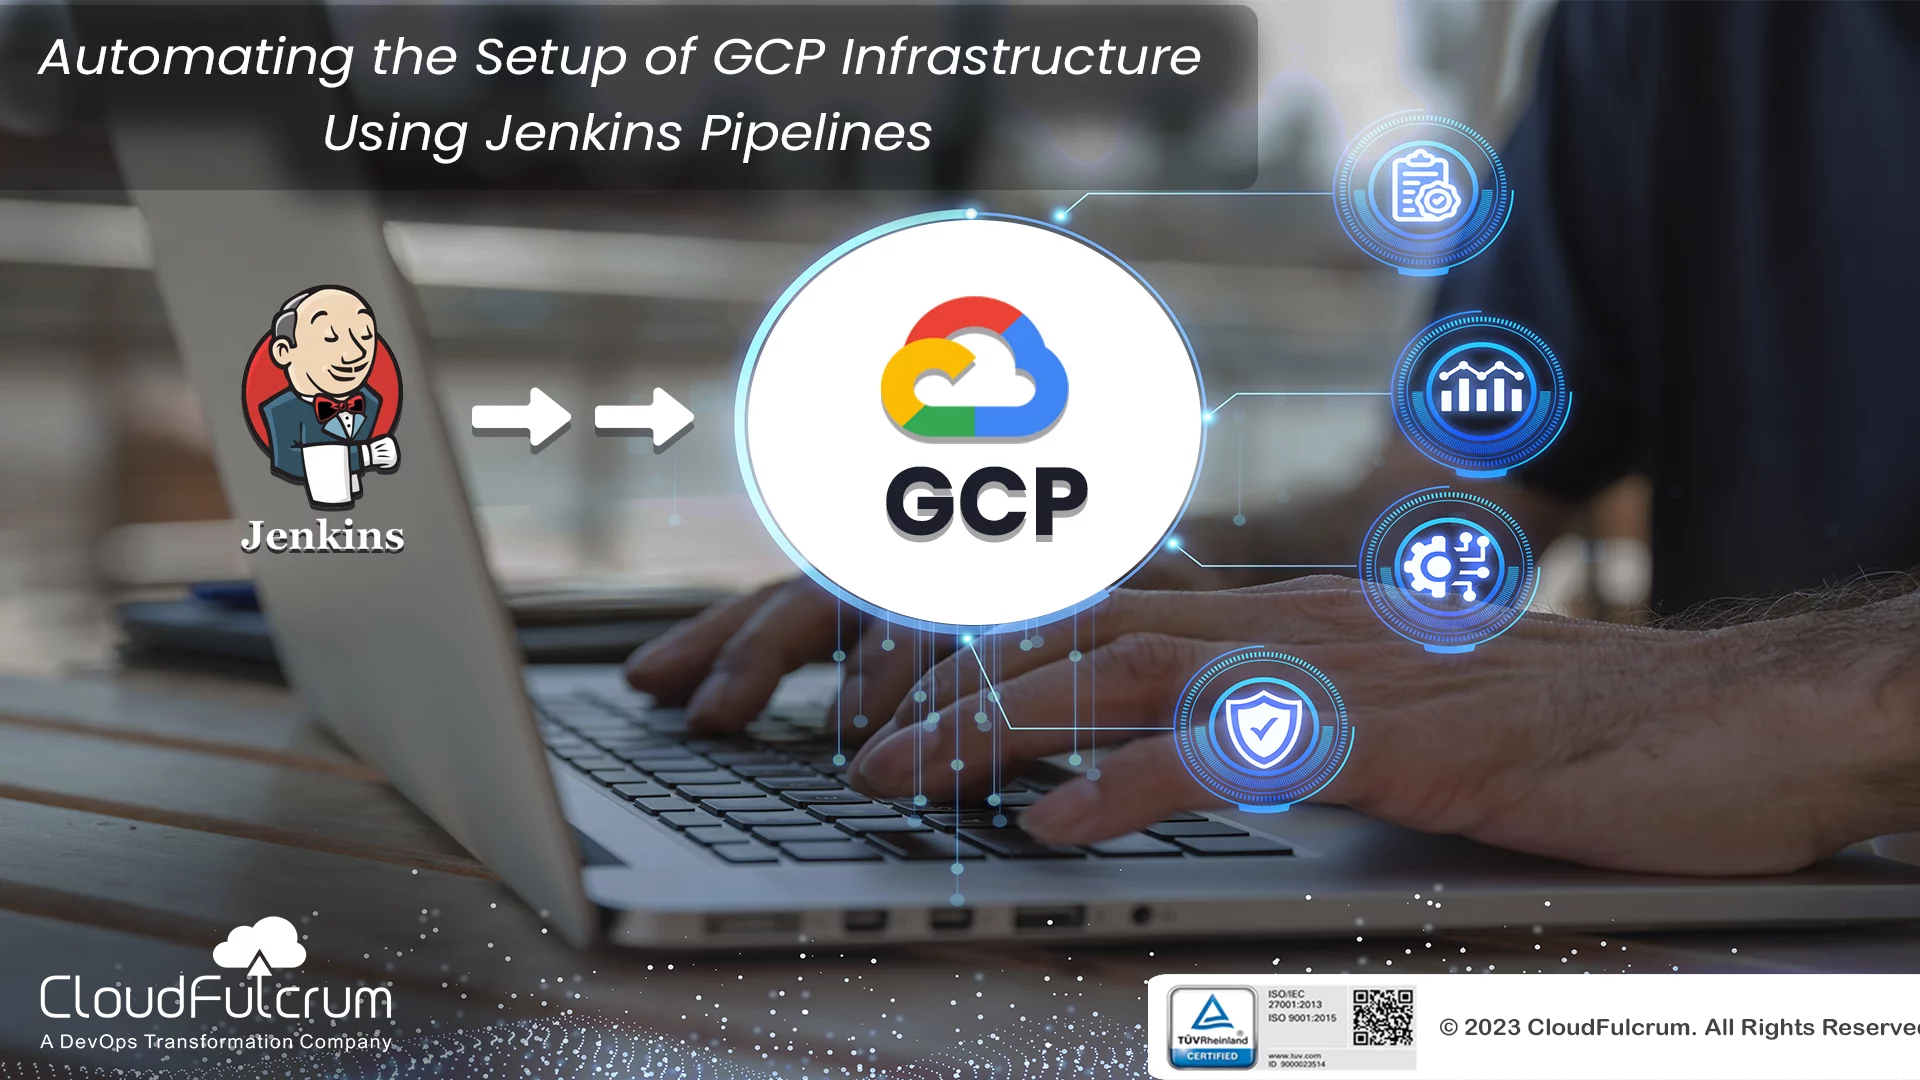 Automating the Setup of GCP Infrastructure Using Jenkins Pipelines